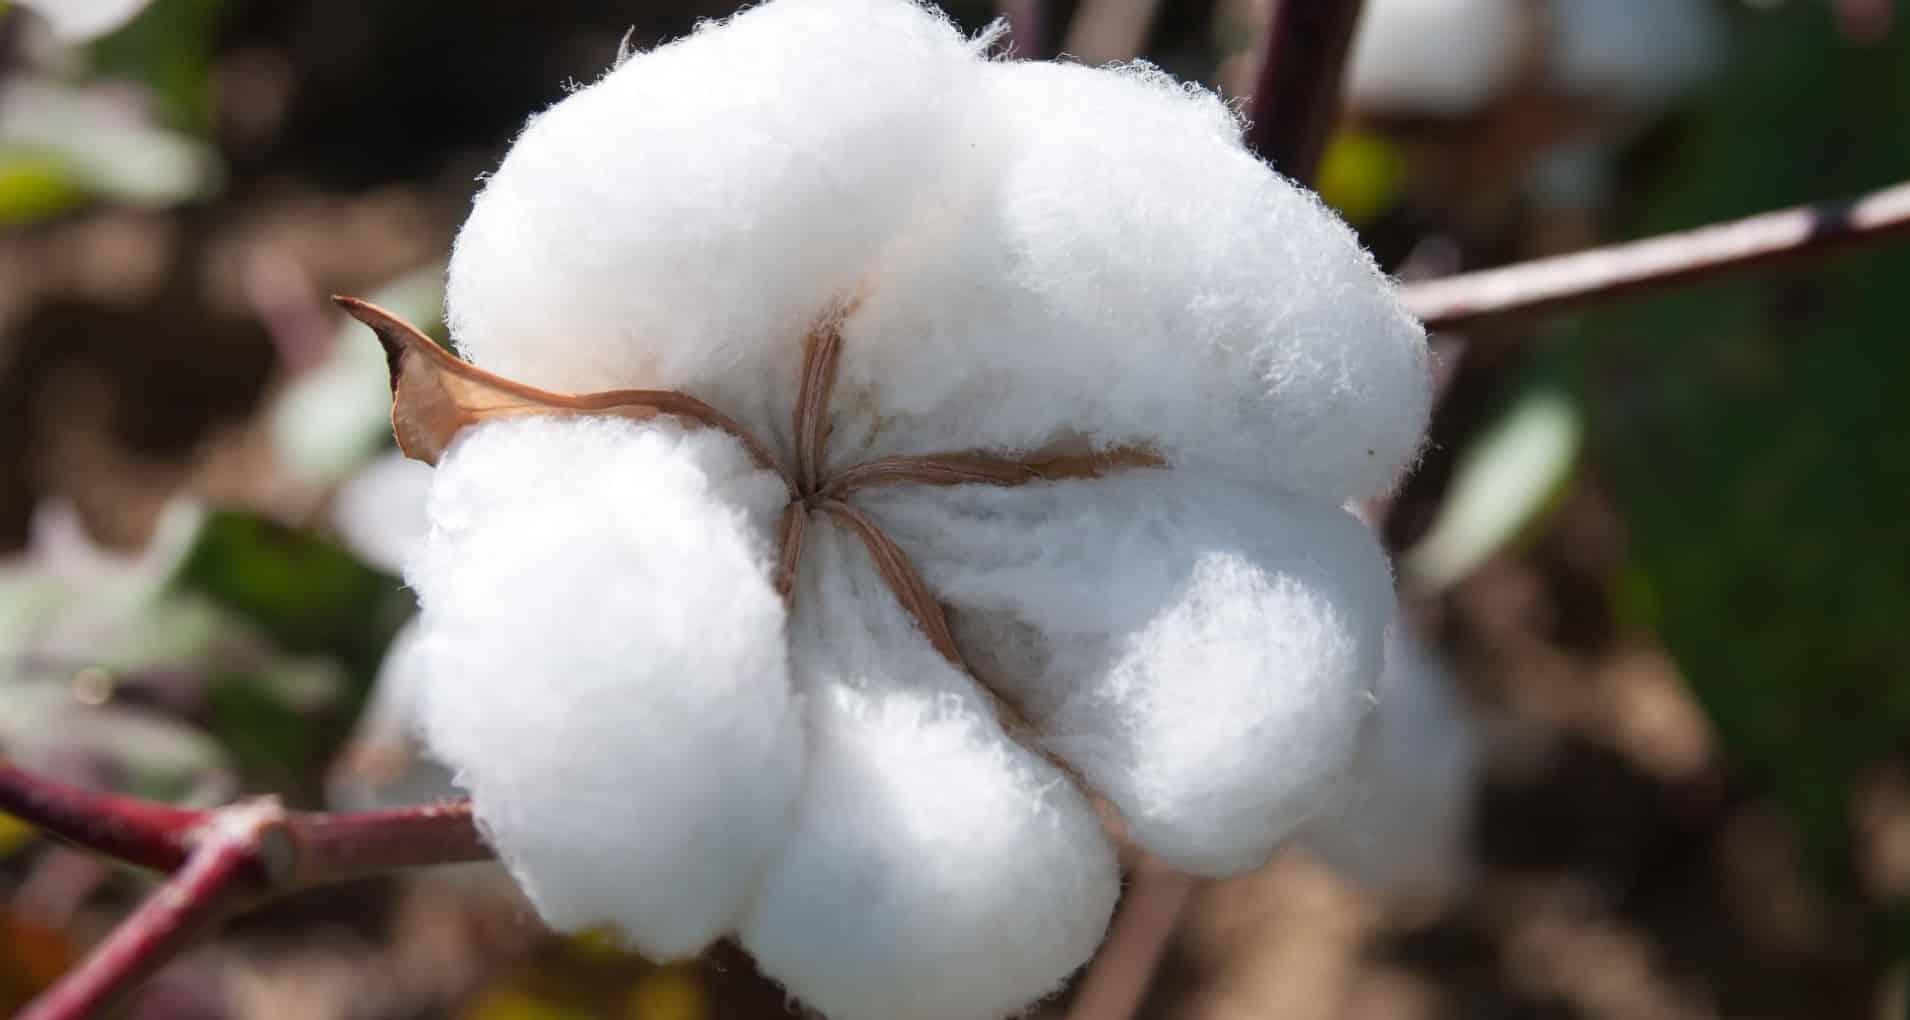 An Integrated Approach for Nitrogen Management In Upland Cotton Across The U.S. Cotton Belt